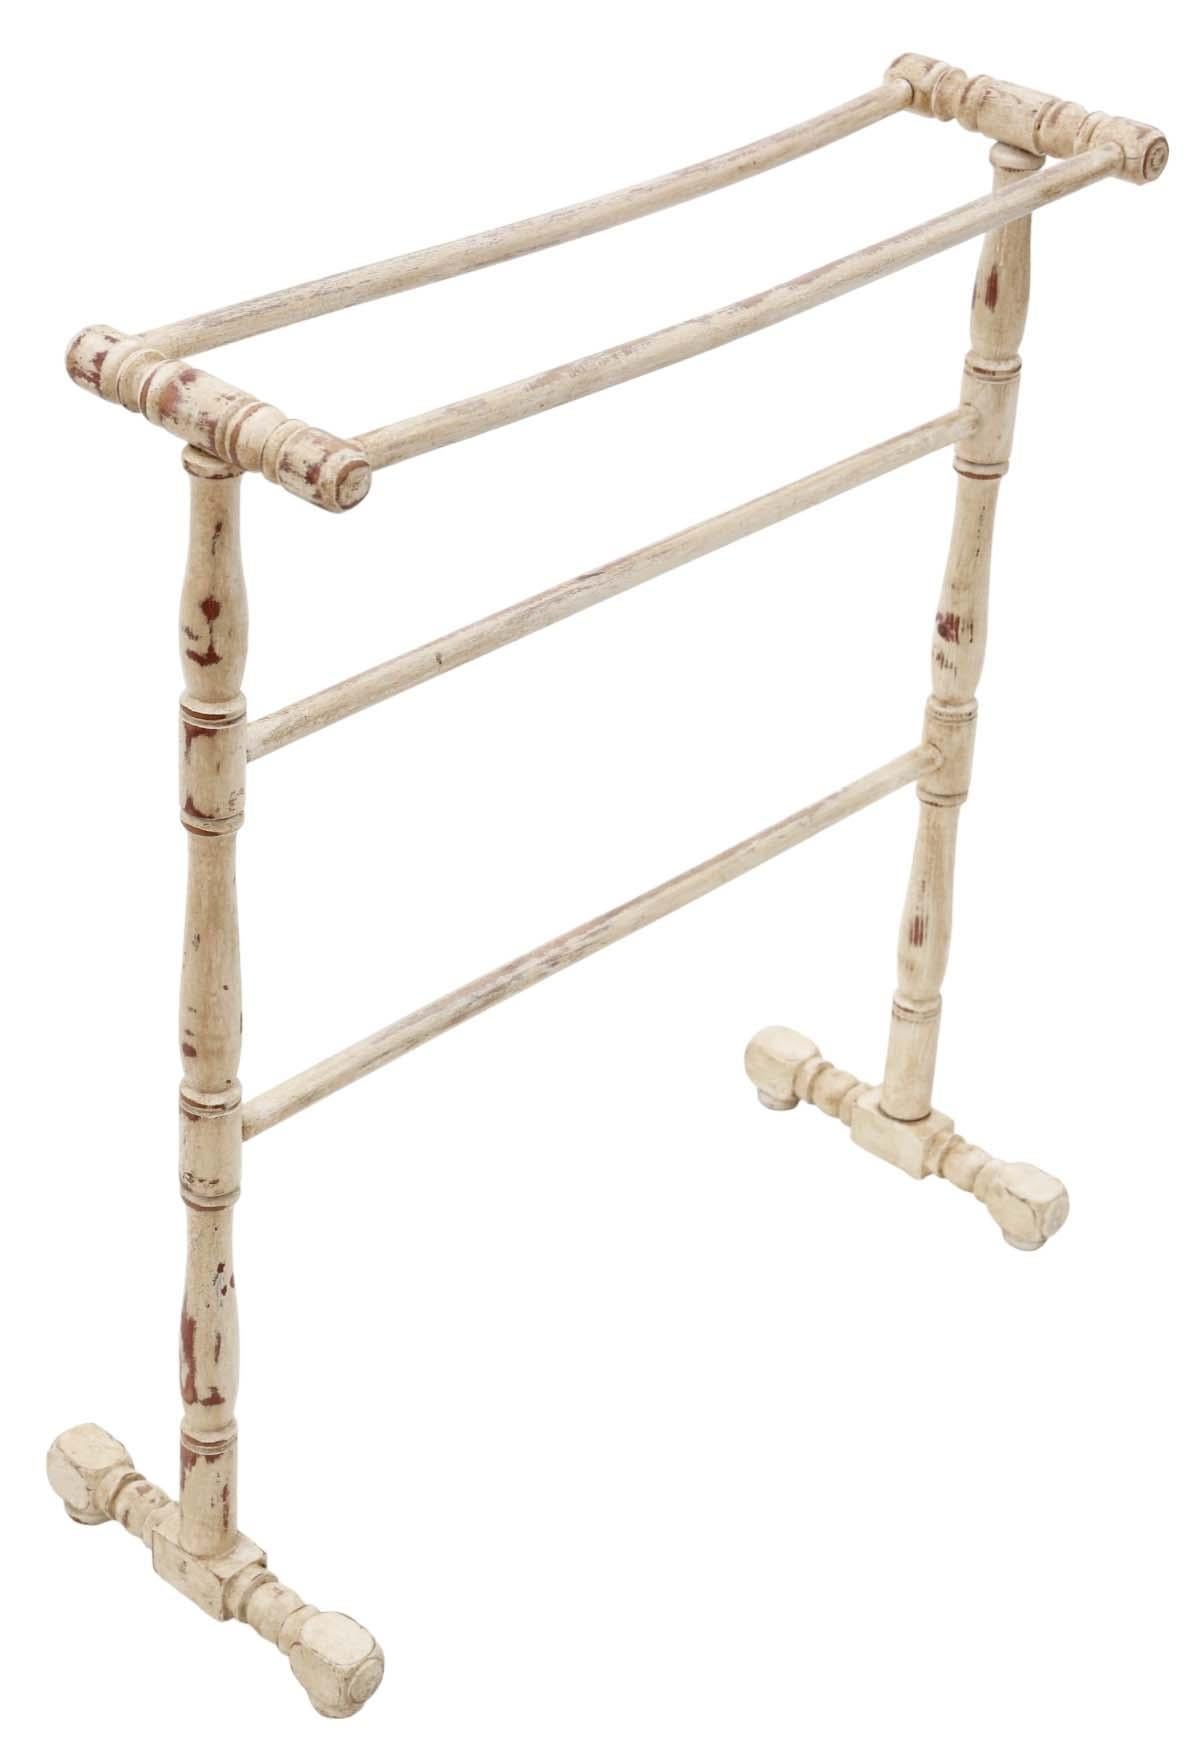 Antique quality C1900 painted towel rail stand Art Nouveau In Good Condition For Sale In Wisbech, Cambridgeshire